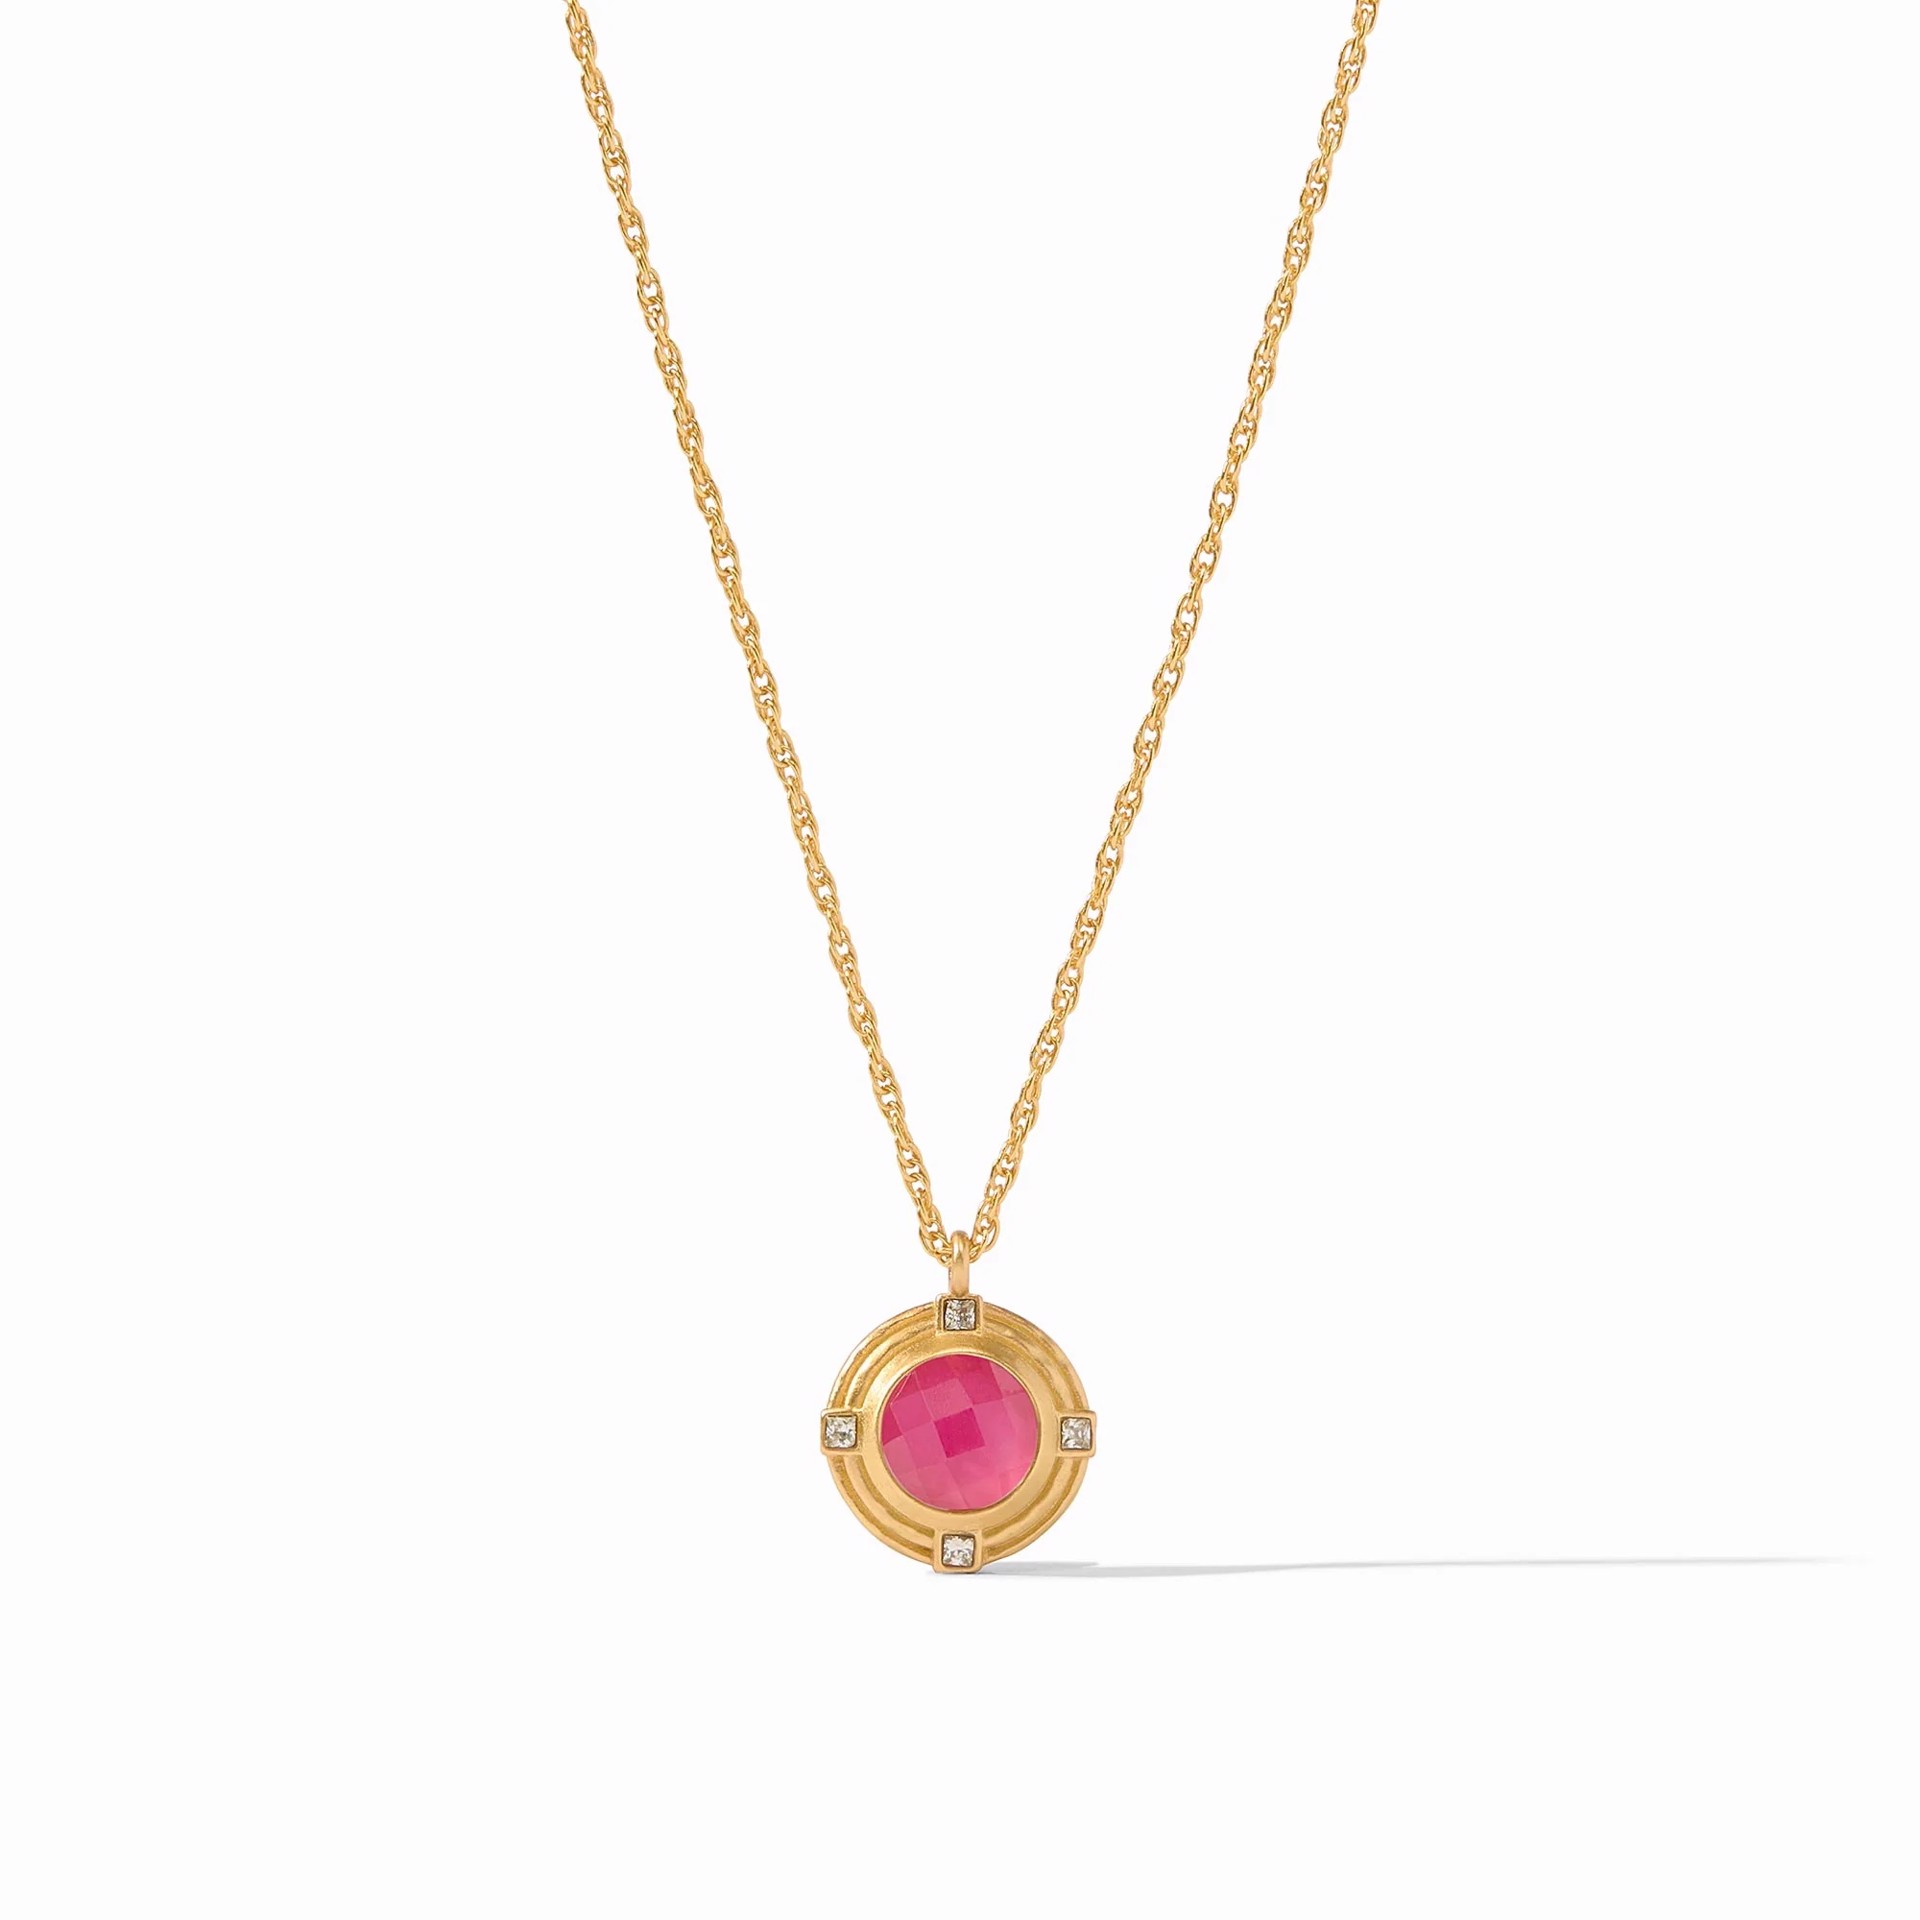 Astor Solitare Necklace - Raspberry by Julie Vos